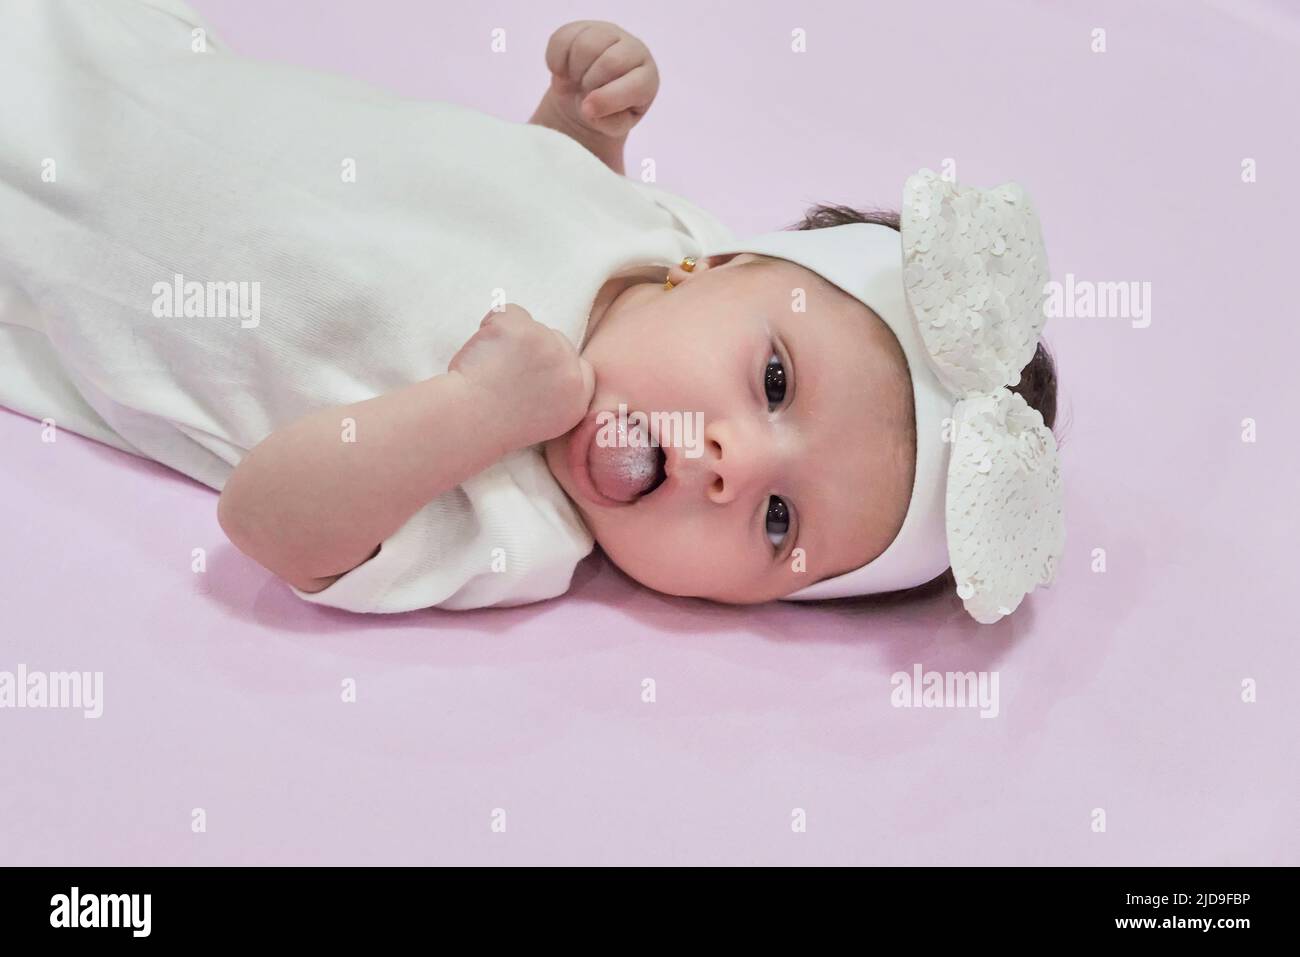 Baby Girl with white Flower Headband. 2-month-old baby girl. Stock Photo